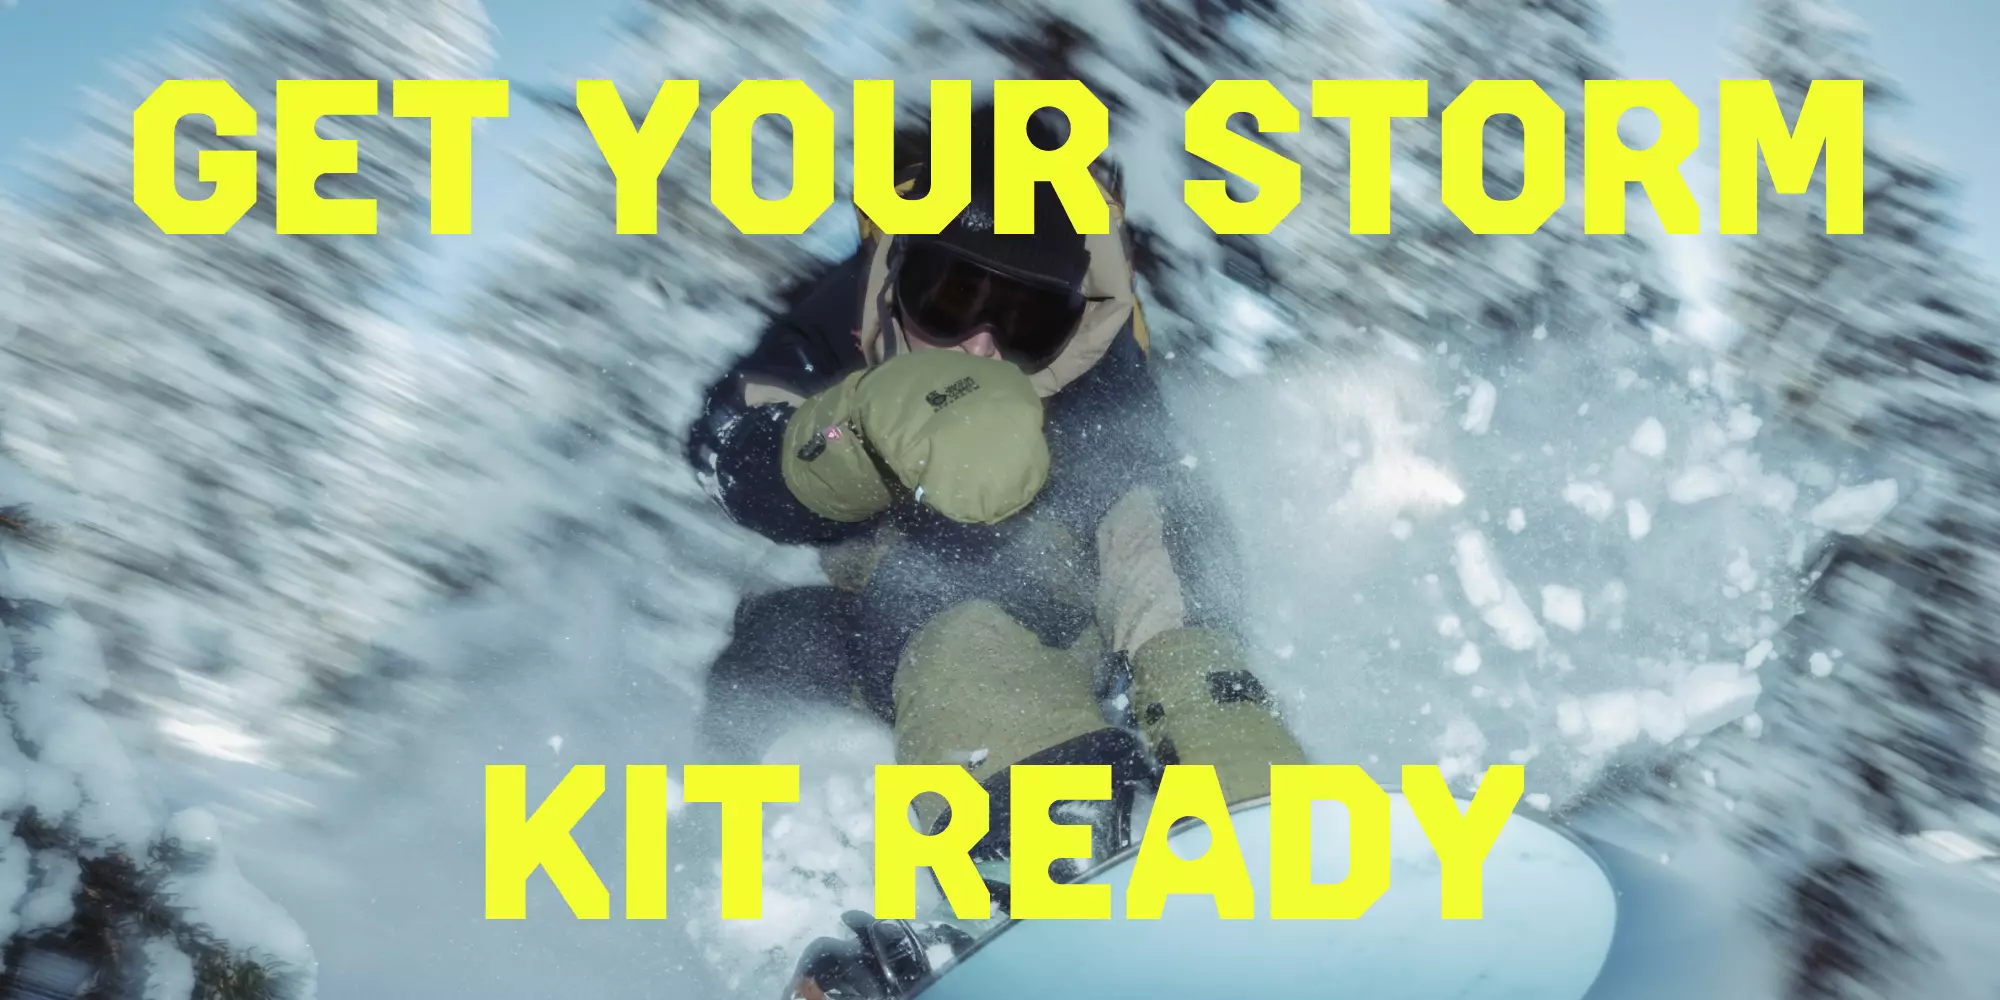 GET YOUR STORM KIT READY